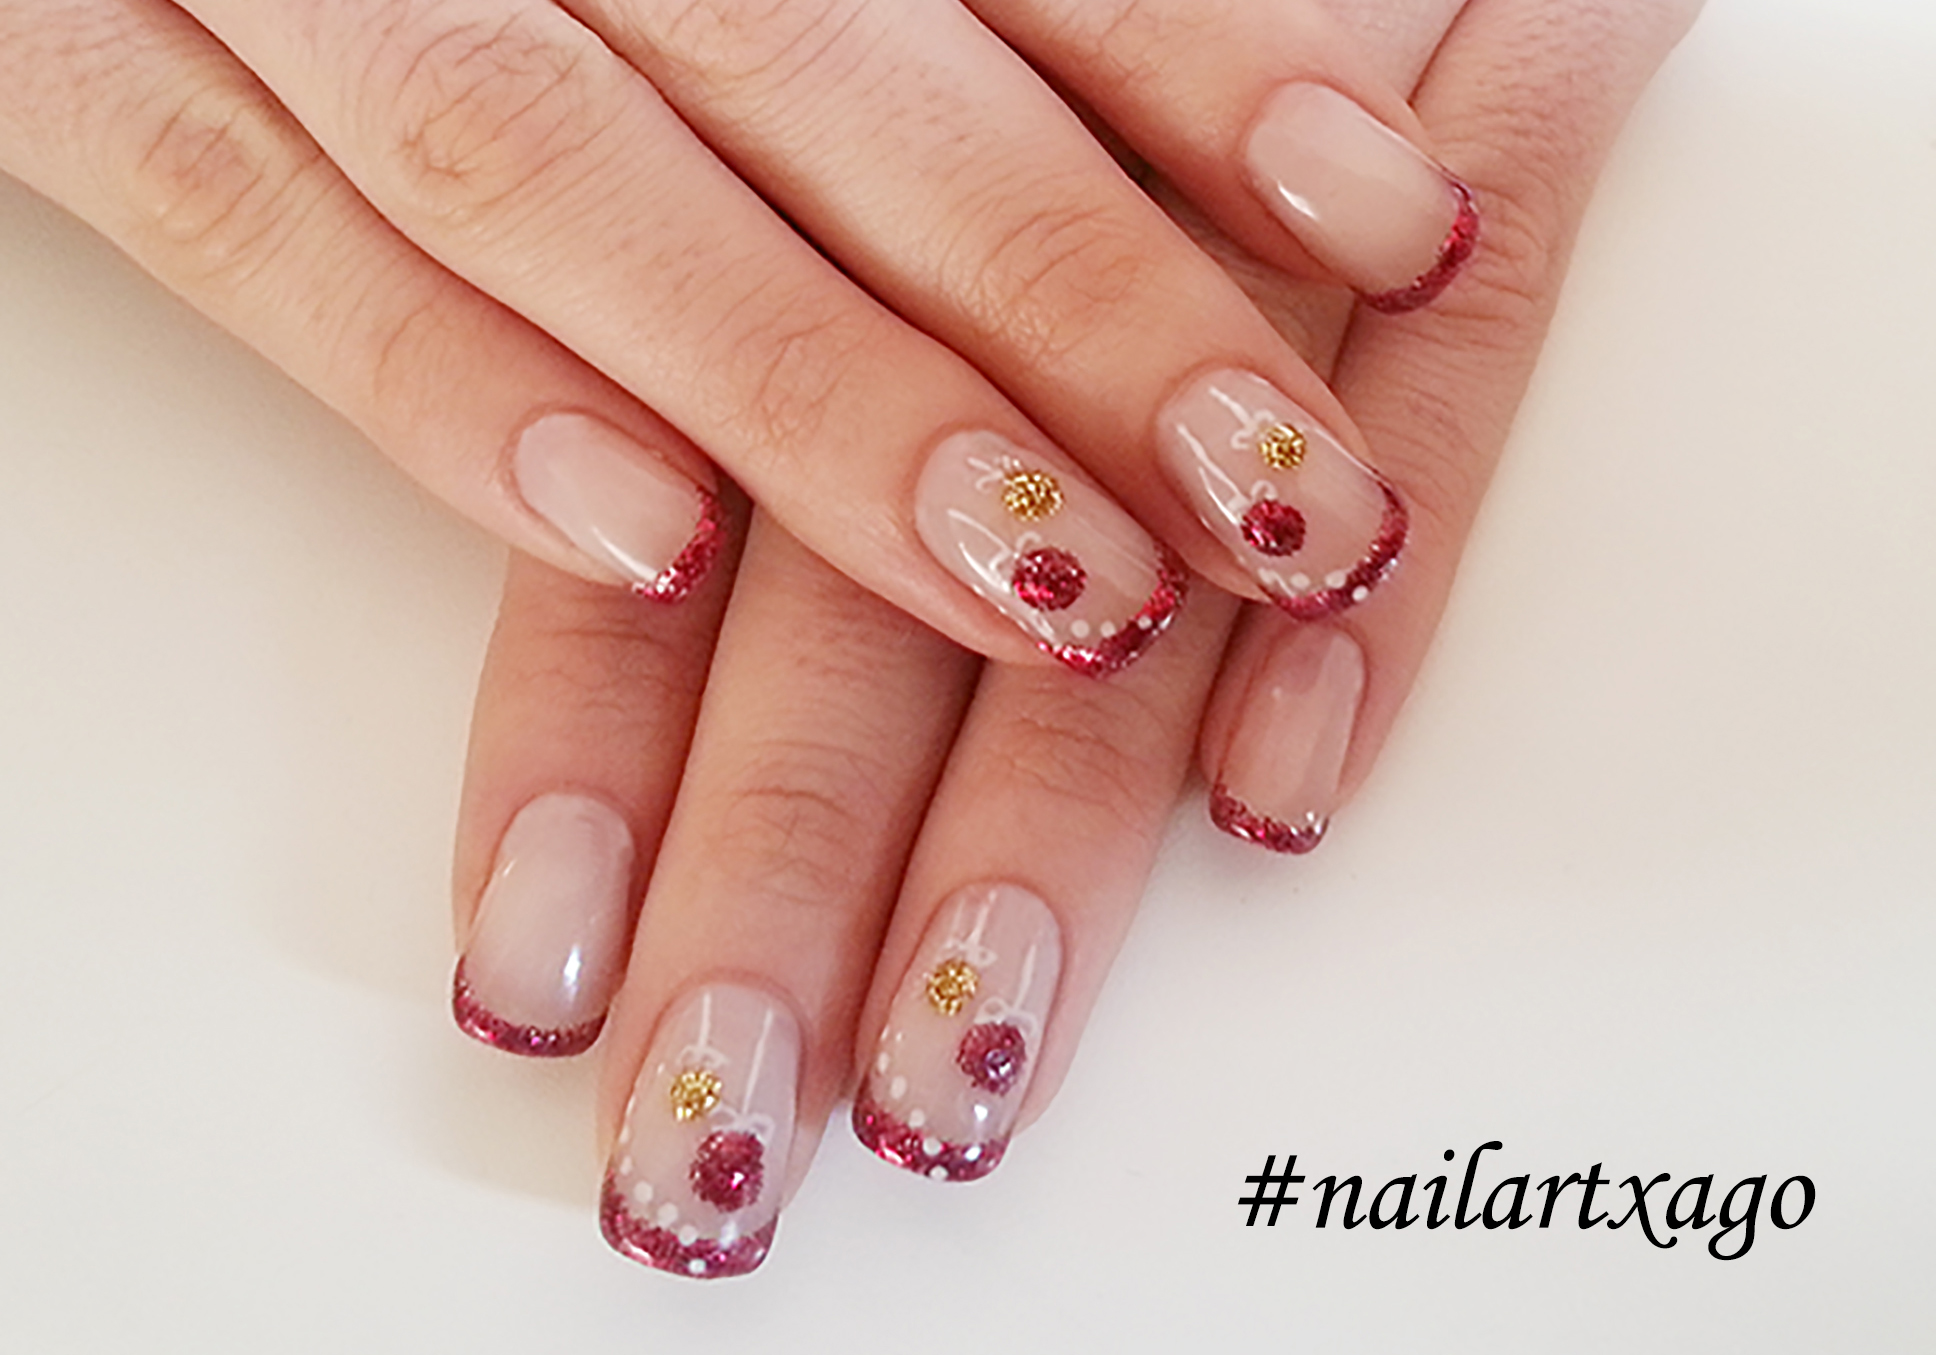 7. The Best Nail Art Instagram Accounts to Follow - wide 11